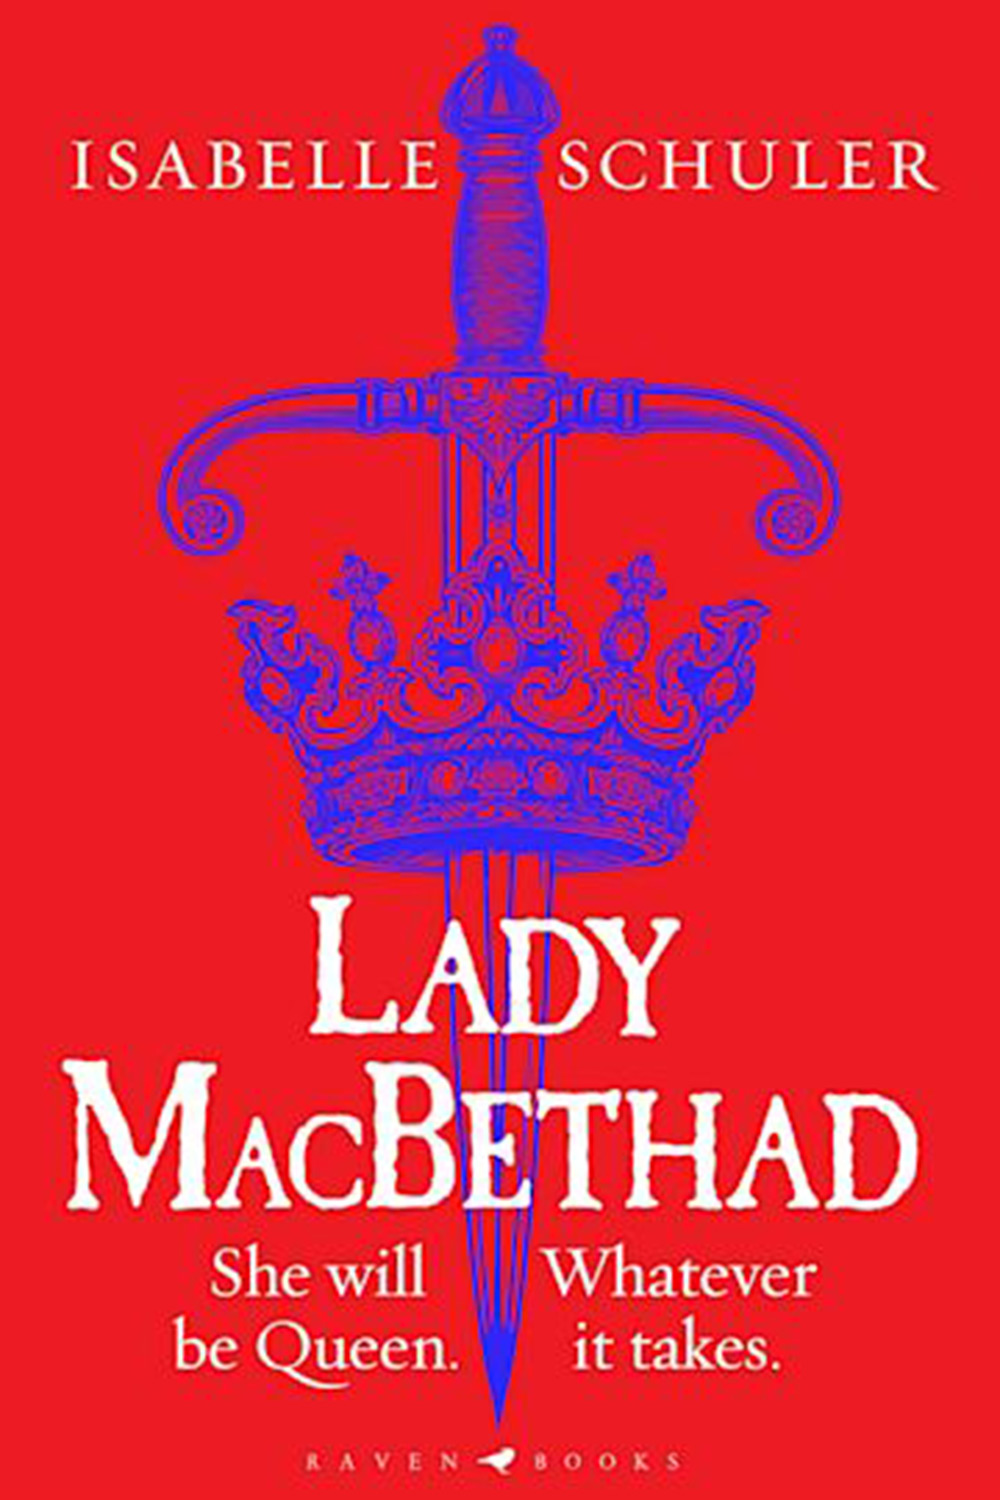 The cover of Lady Macbethad, one of the best books for 2023